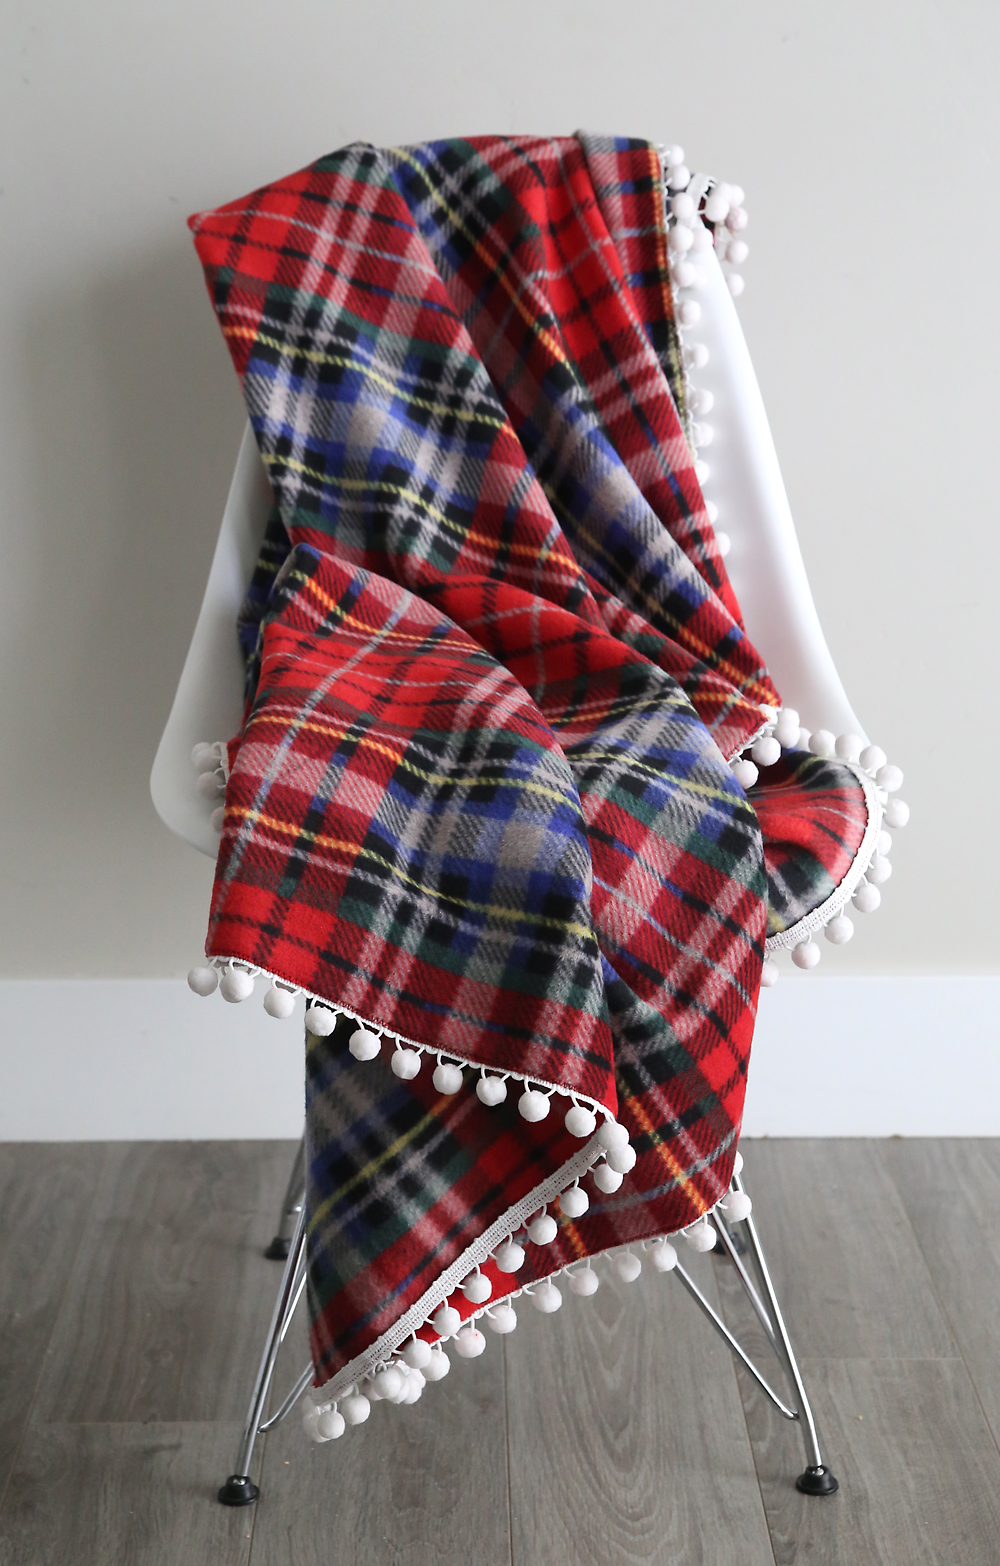 DIY fleece blanket trimmed with pom poms draped over a chair